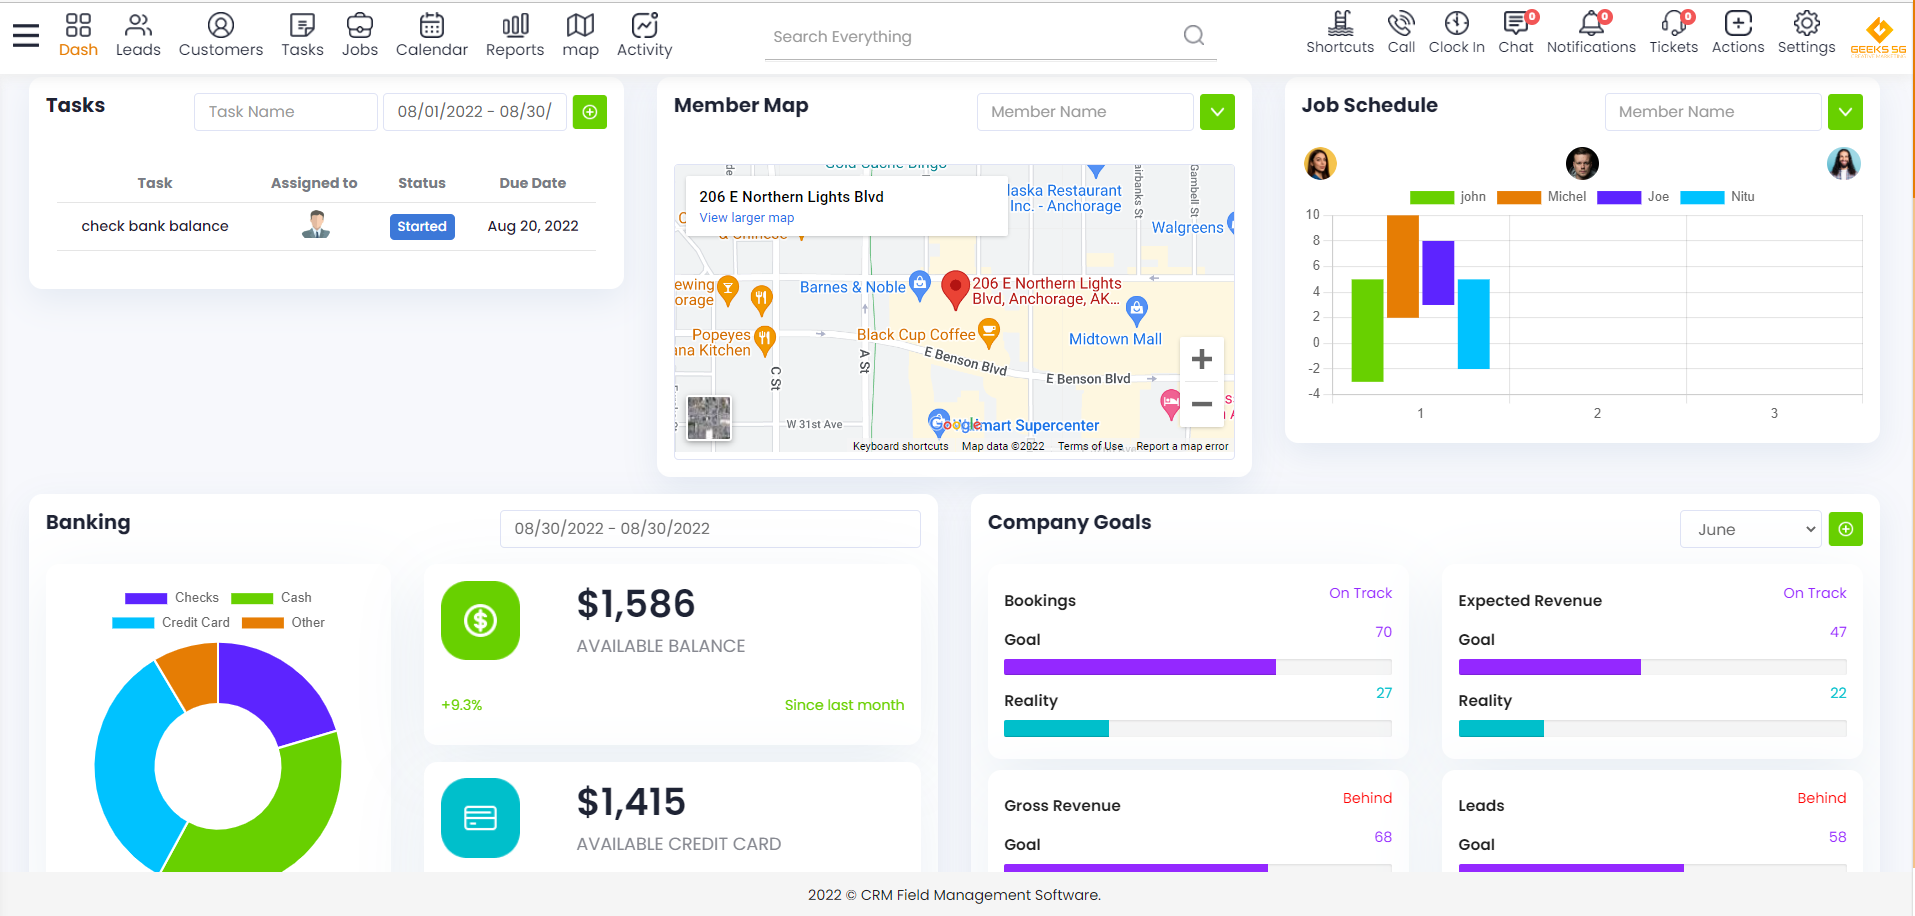 Customized dashboard to check banking, company goals, maps, project management and field jobs.